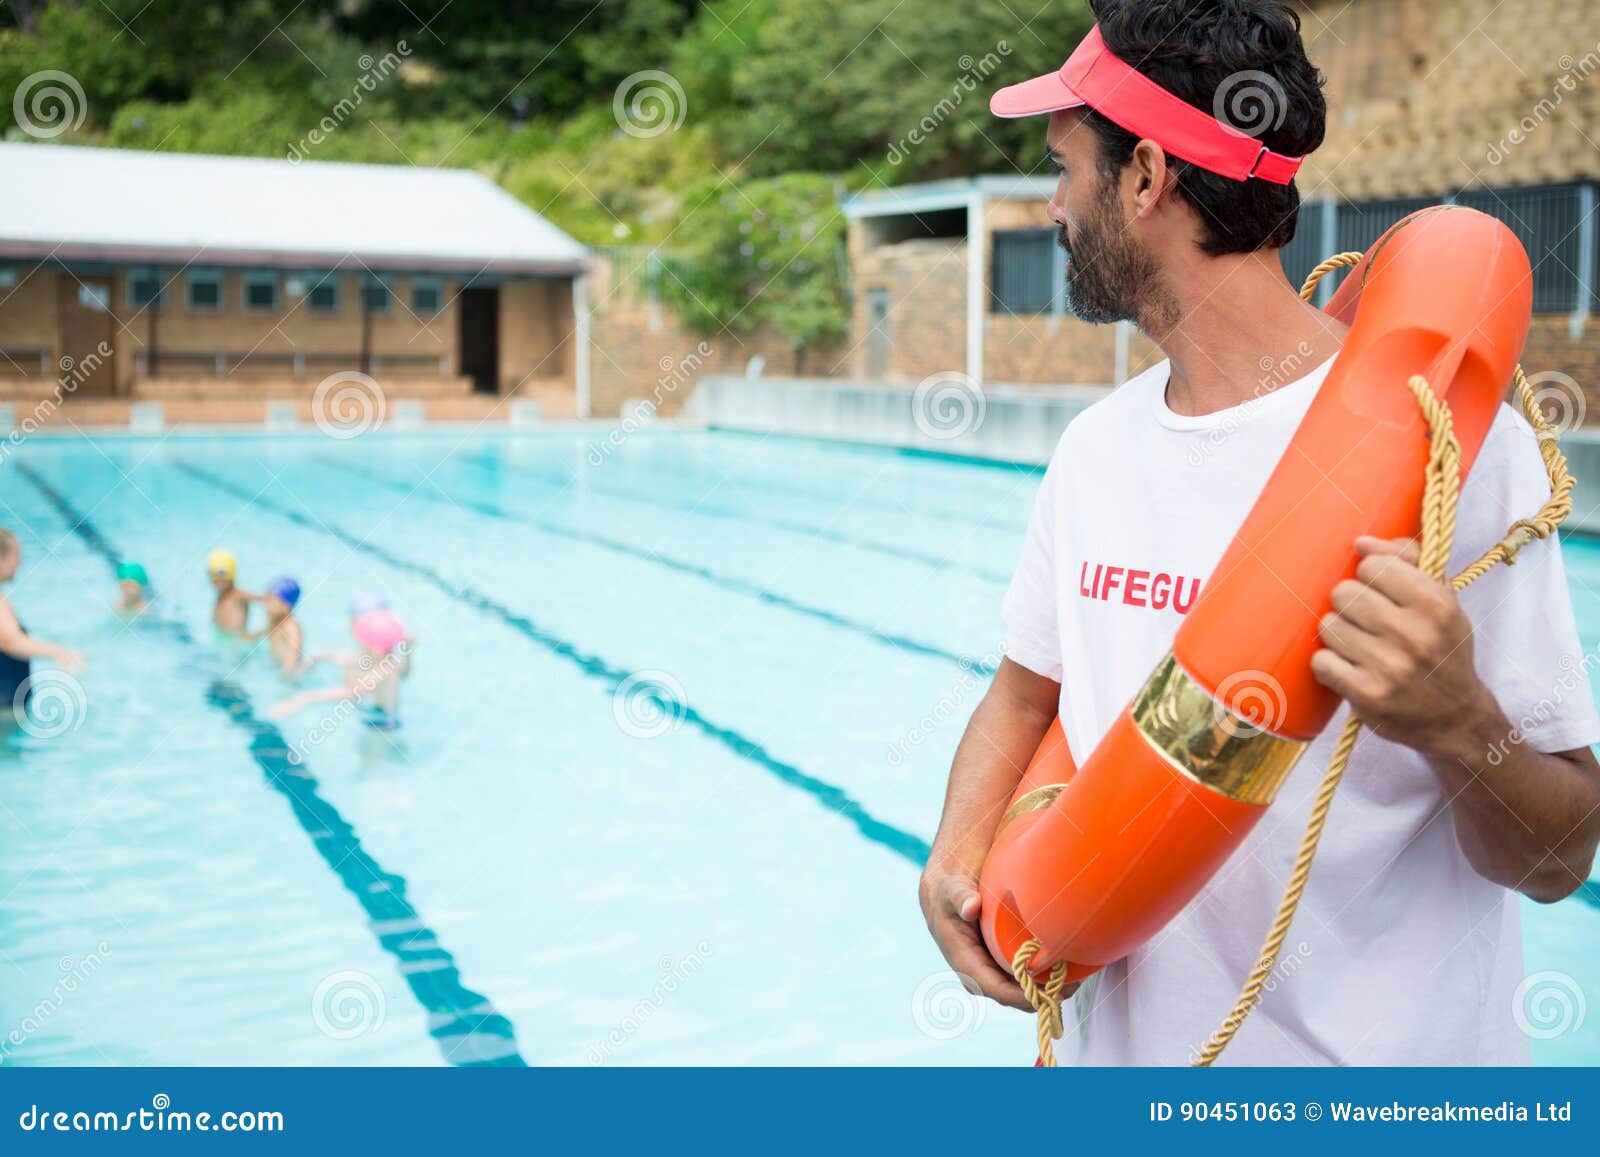 lifeguard with lifebuoy looking at students playing in the pool